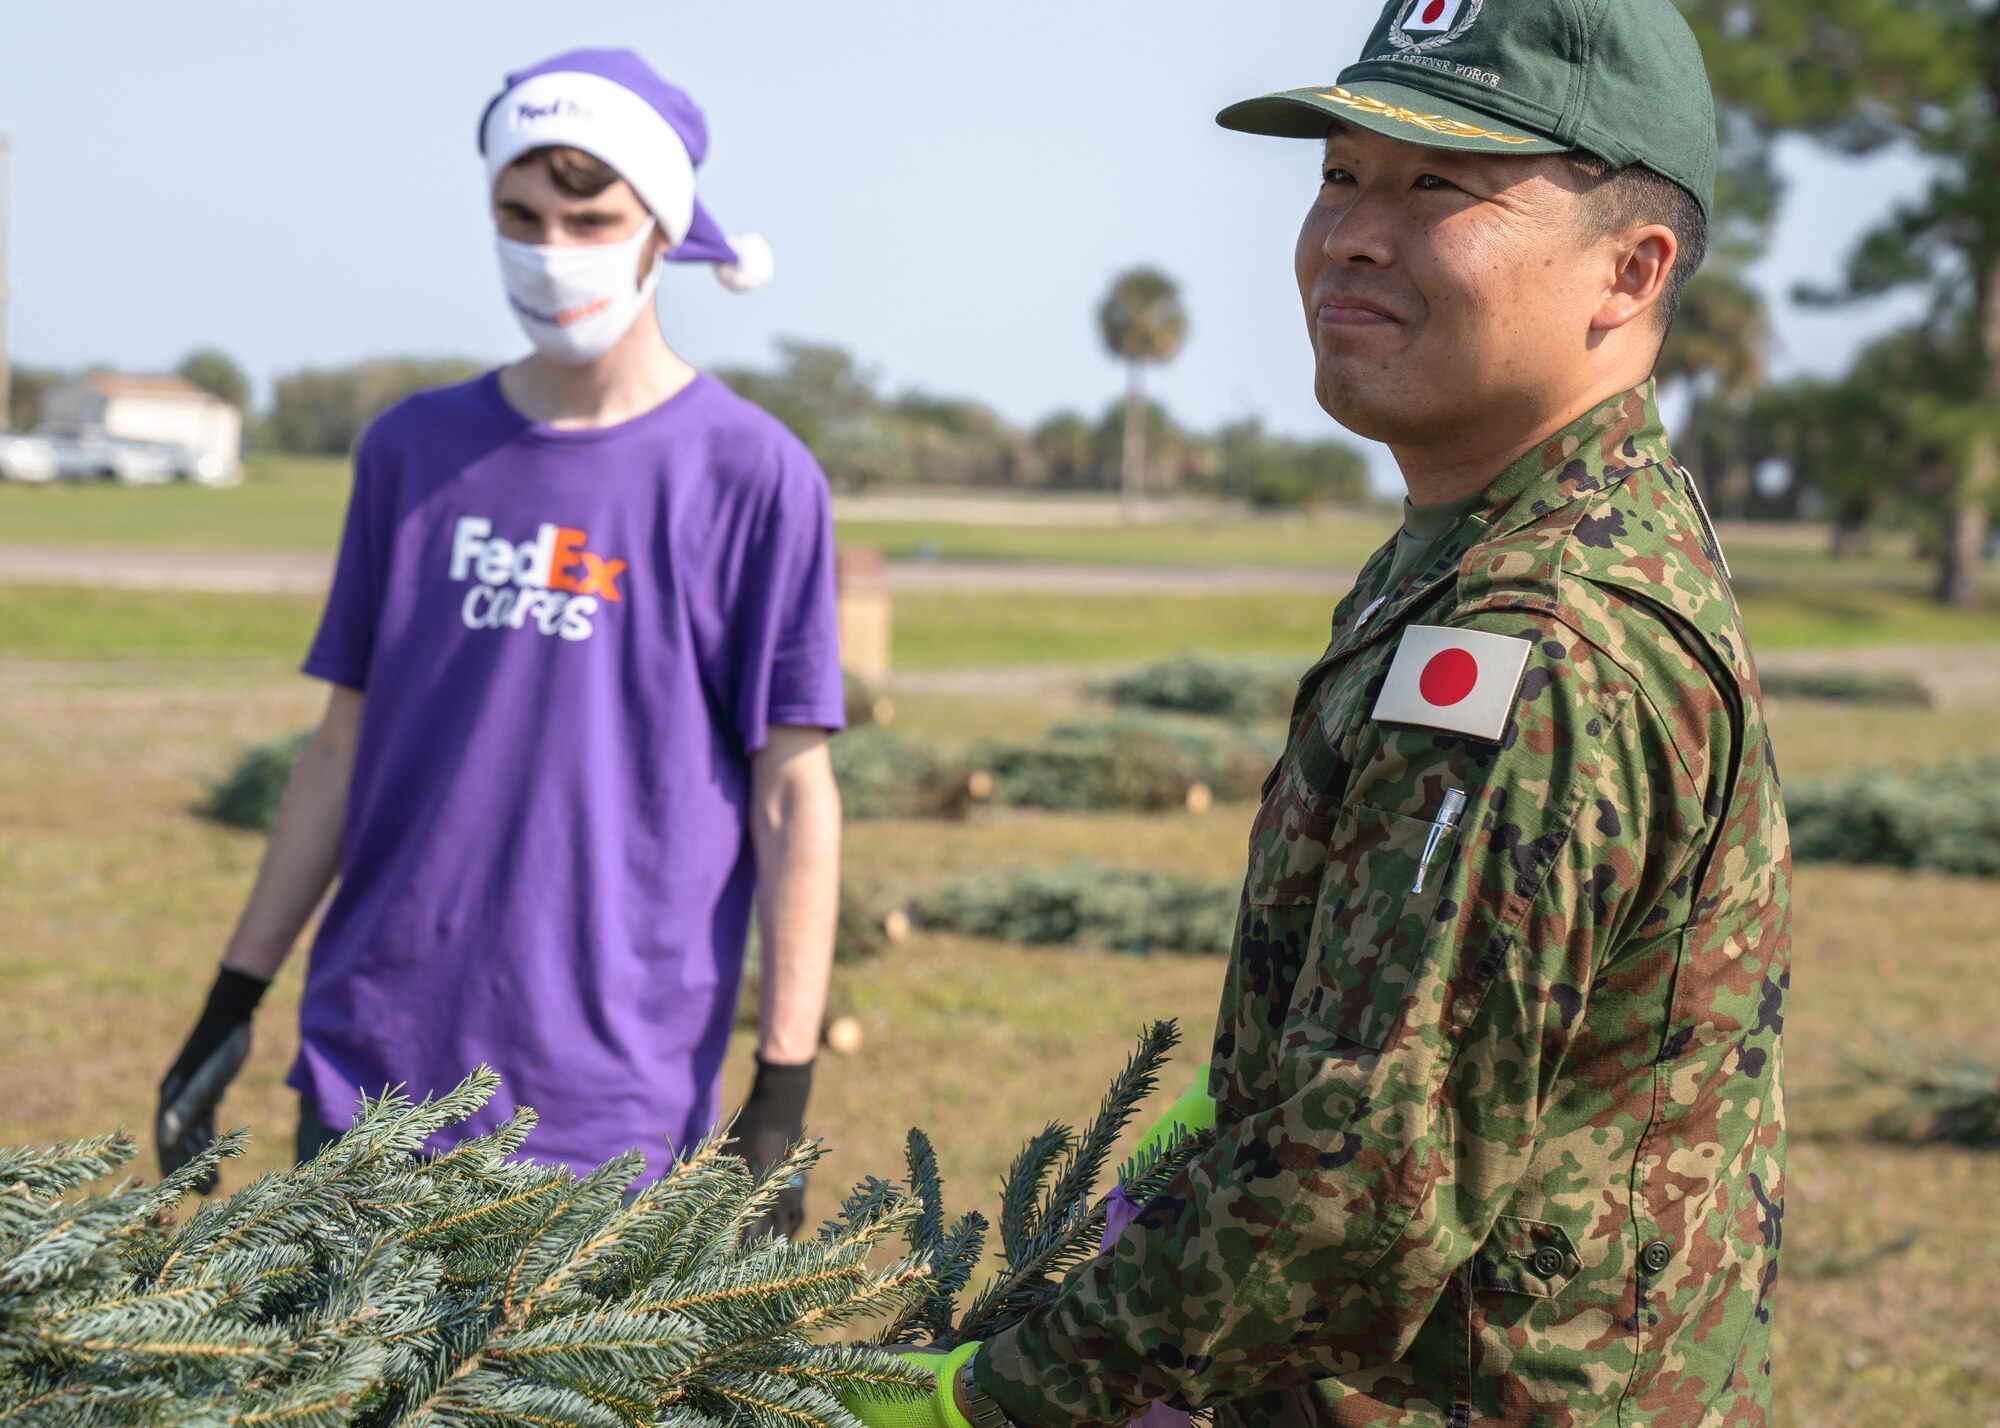 A member of the Japanese Self-Defense Forces picks up a Christmas tree during the Trees for Troops holiday event at MacDill Air Force Base, Florida, Dec. 9, 2021.